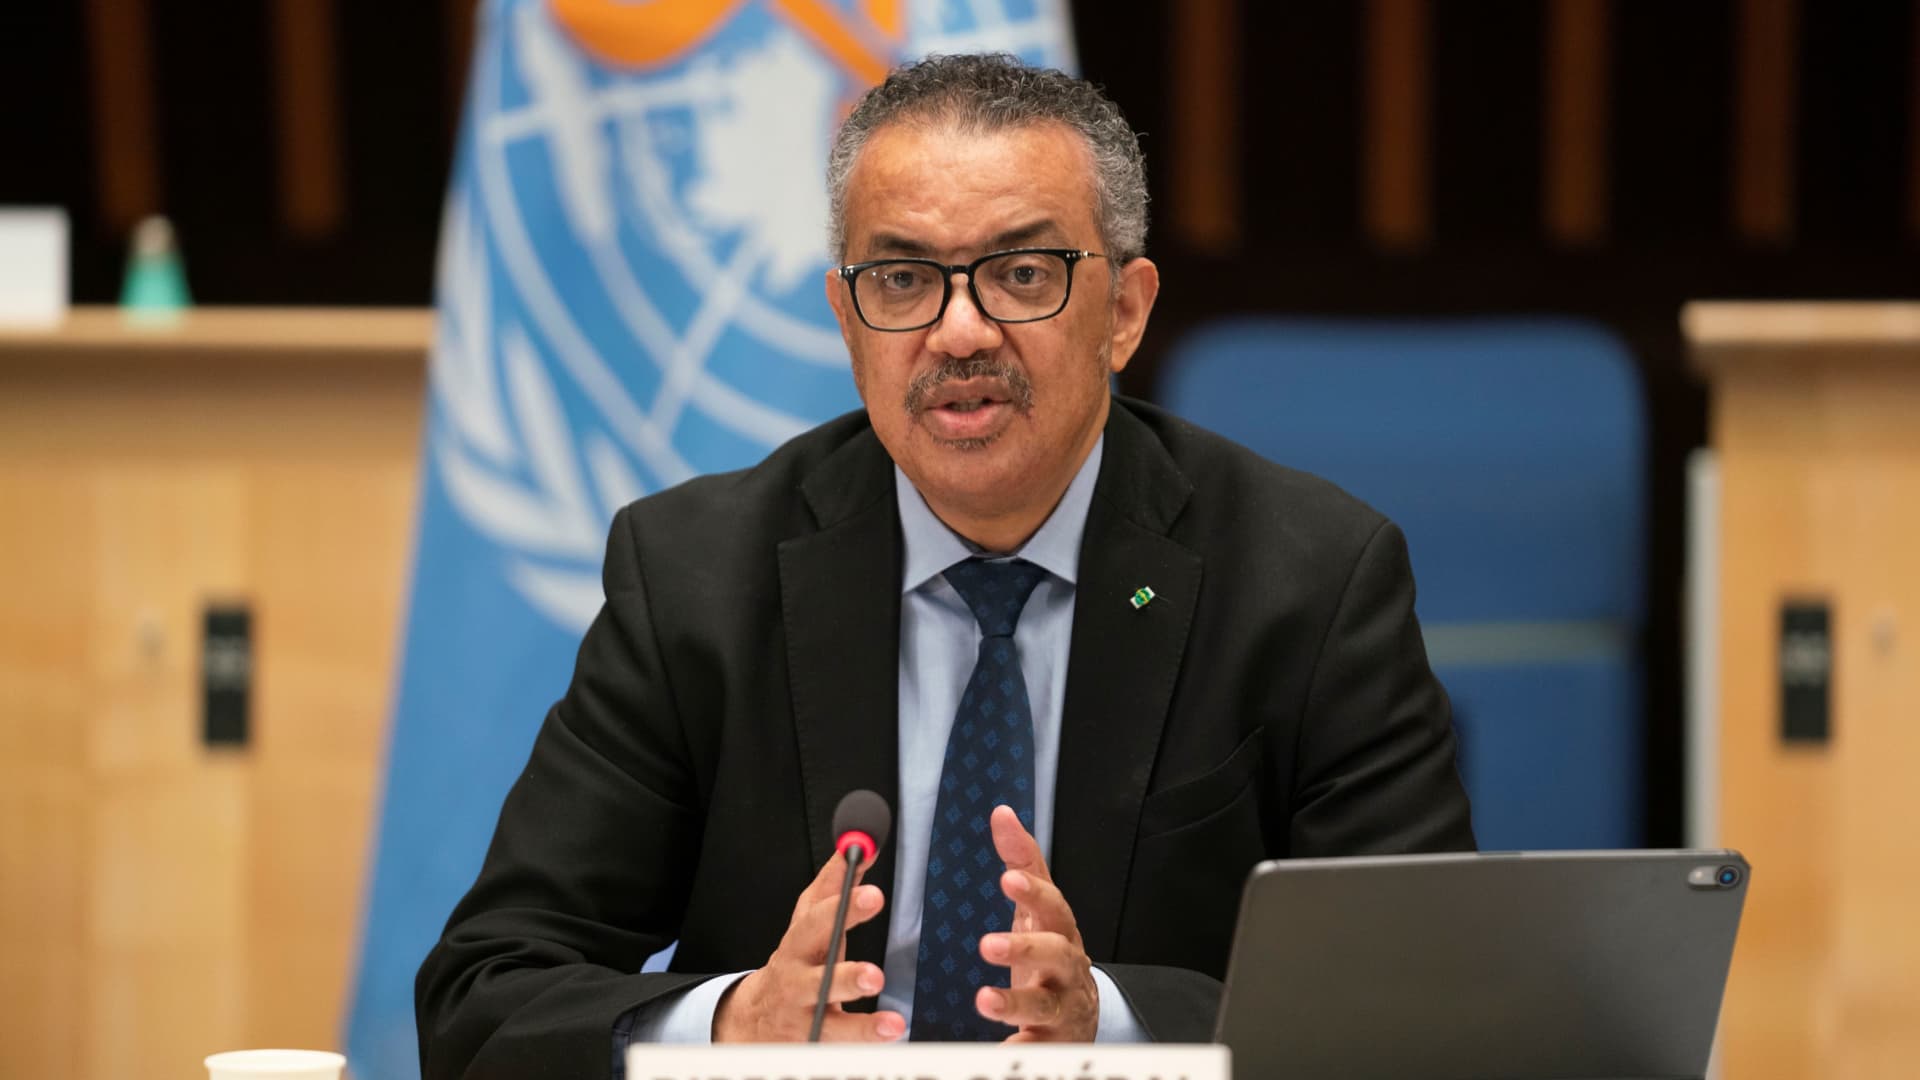 Tedros Adhanom Ghebreyesus, Director General of the World Health Organization (WHO) speaks after Dr. Anthony Fauci, director of the National Institute of Allergy and Infectious Diseases during the 148th session of the Executive Board on the coronavirus disease (COVID-19) outbreak in Geneva, Switzerland, January 21, 2021.